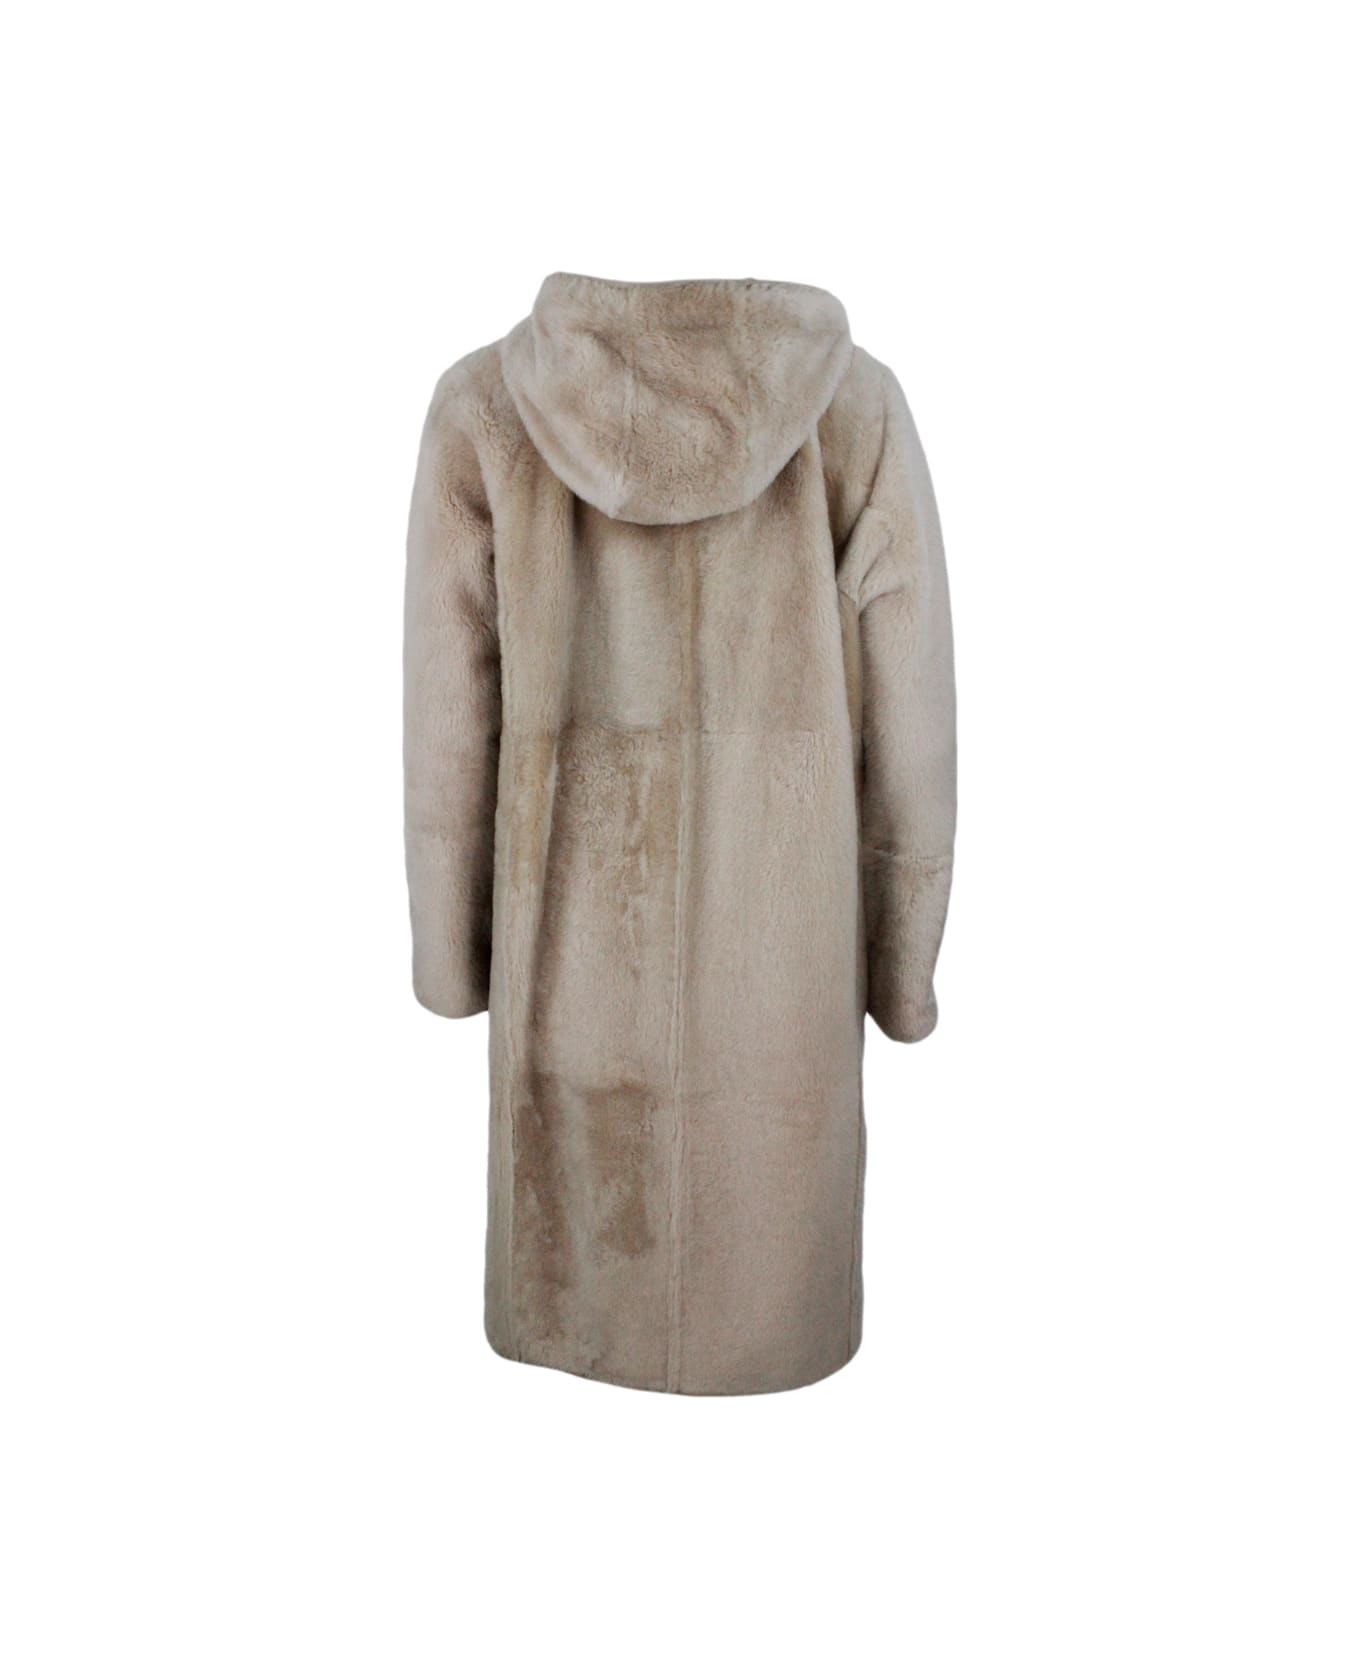 Brunello Cucinelli Reversible Coat In Soft Shearling With Hood - Beige